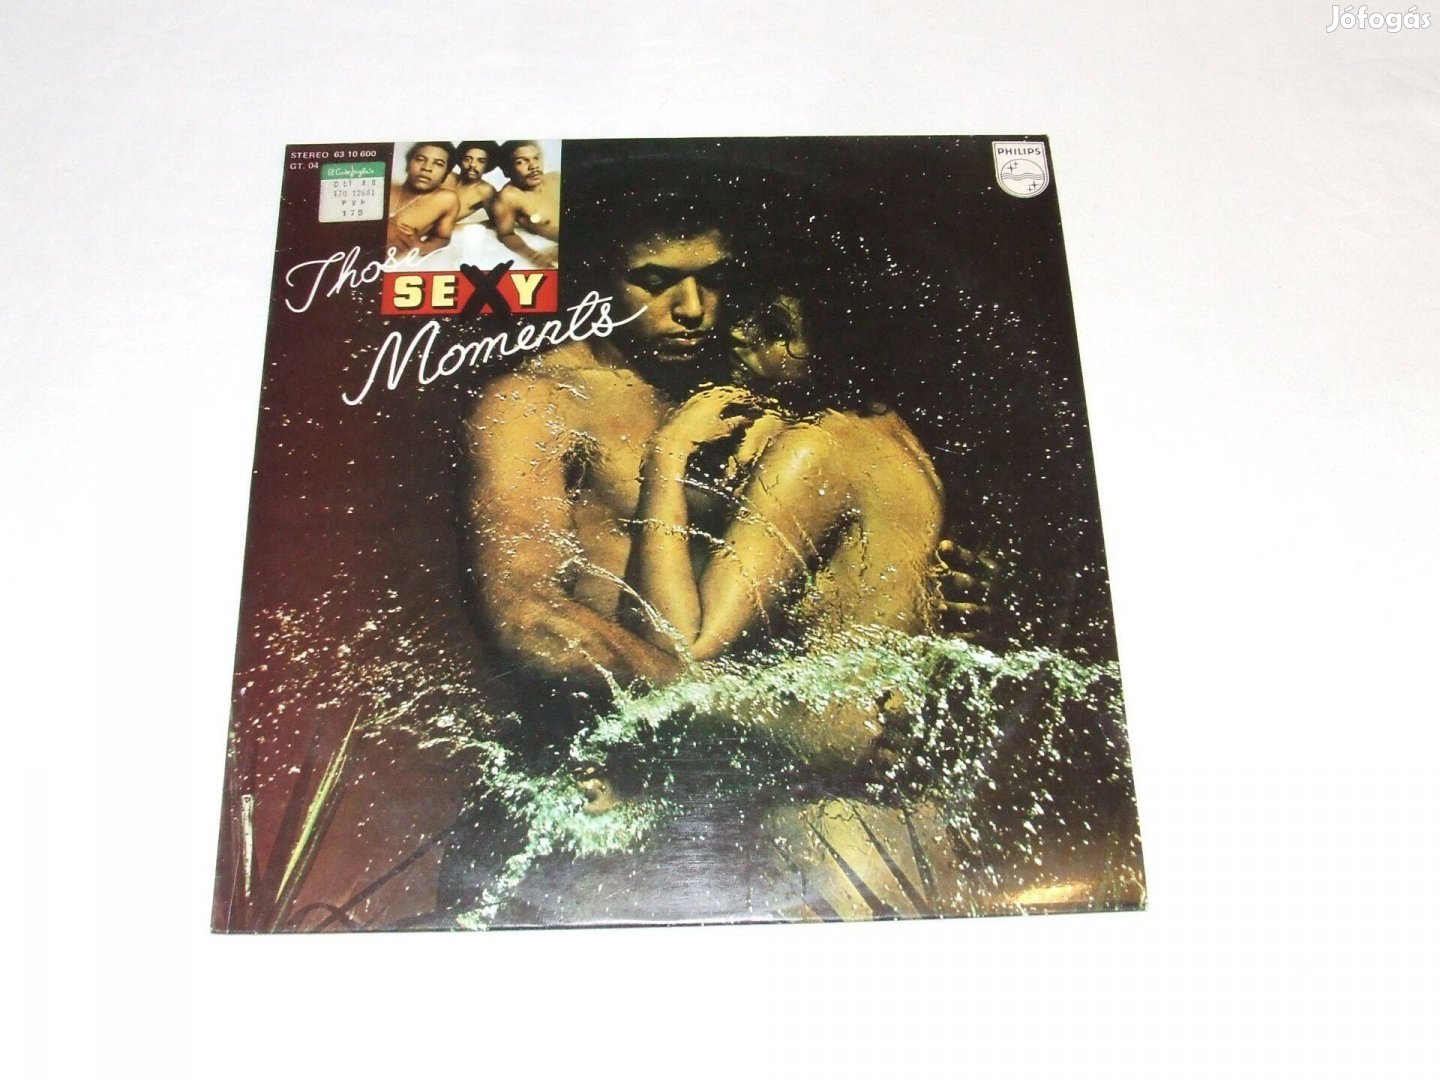 The Moments: Those Sexy Moments - spanyol nyomású soul / funk LP